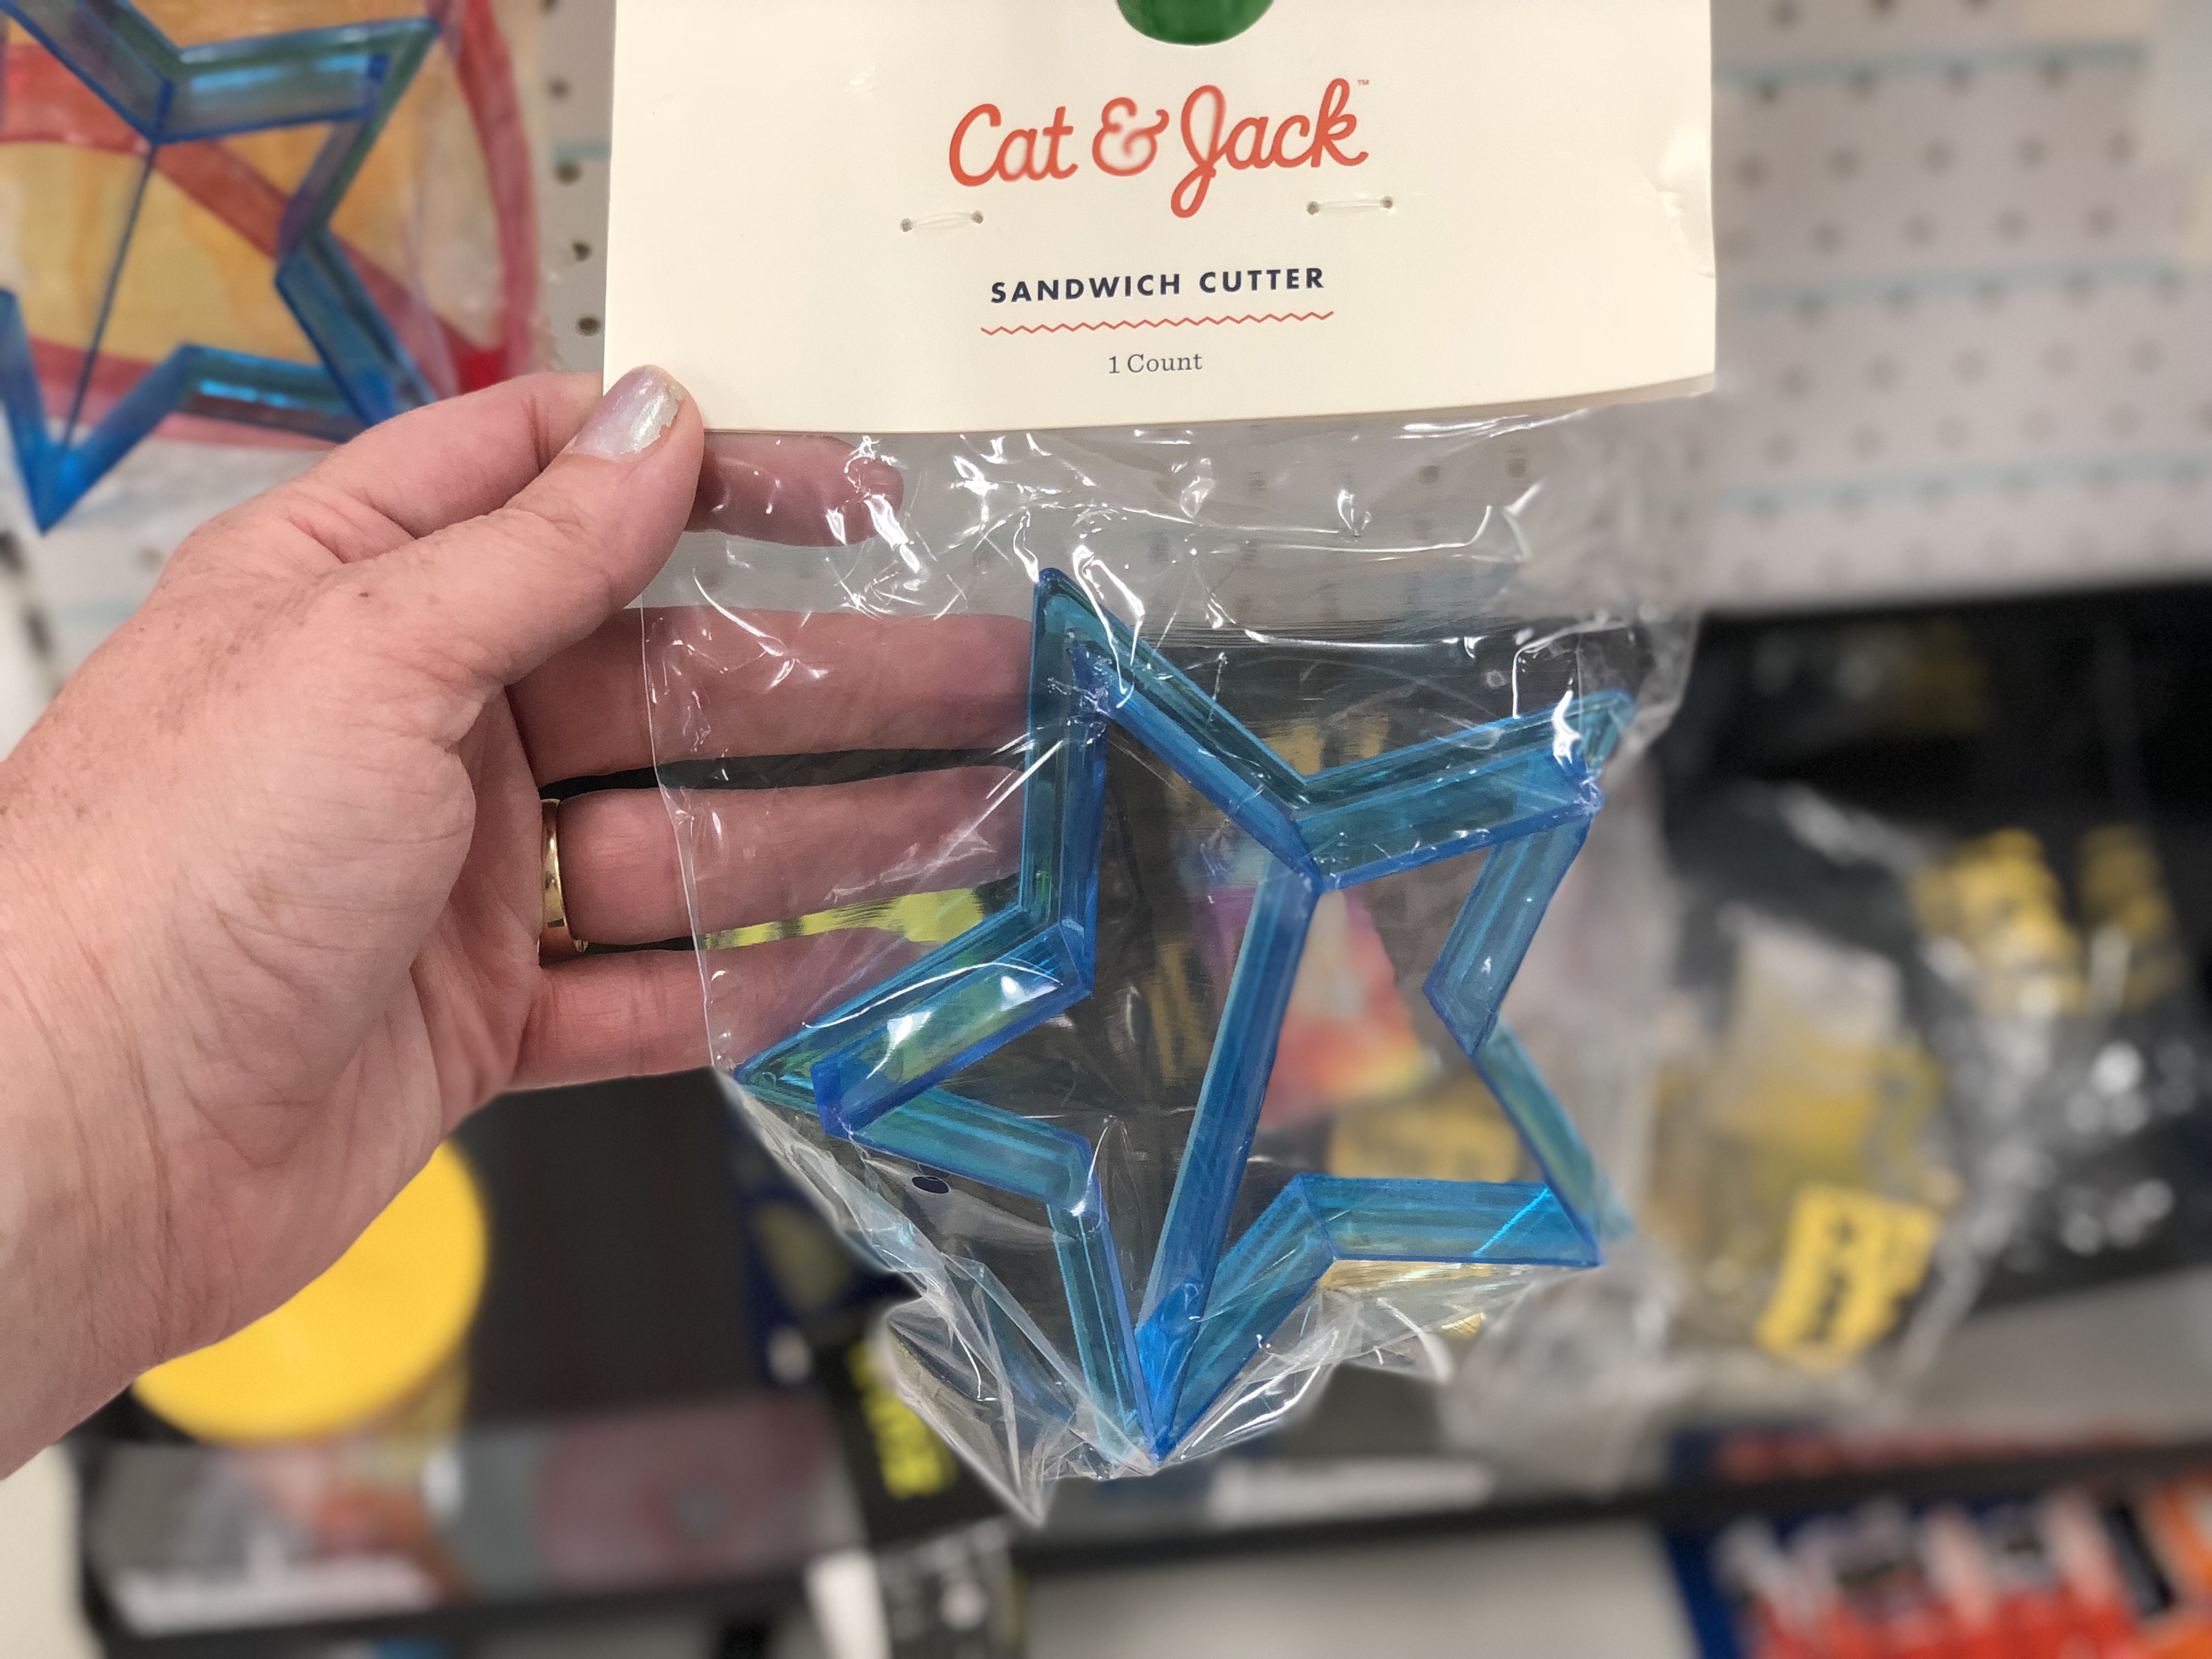 Cat & Jack Bento Box items at Target make lunches fun - Cat & Jack sandwich cutter